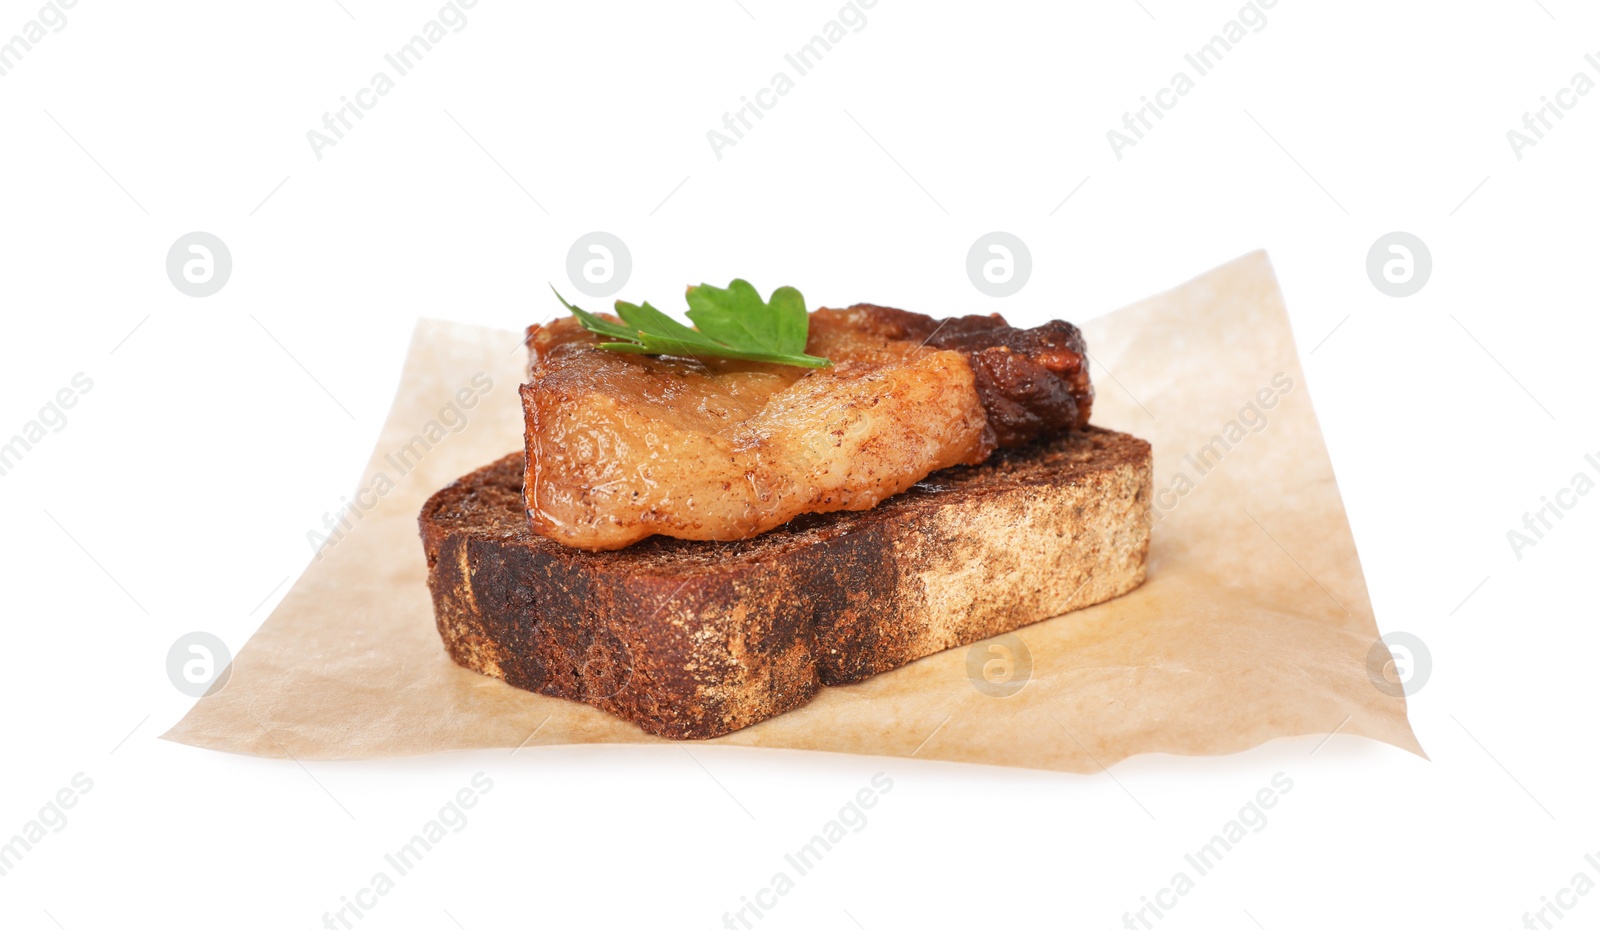 Photo of Rye bread with tasty fried crackling and parsley on white background. Cooked pork lard